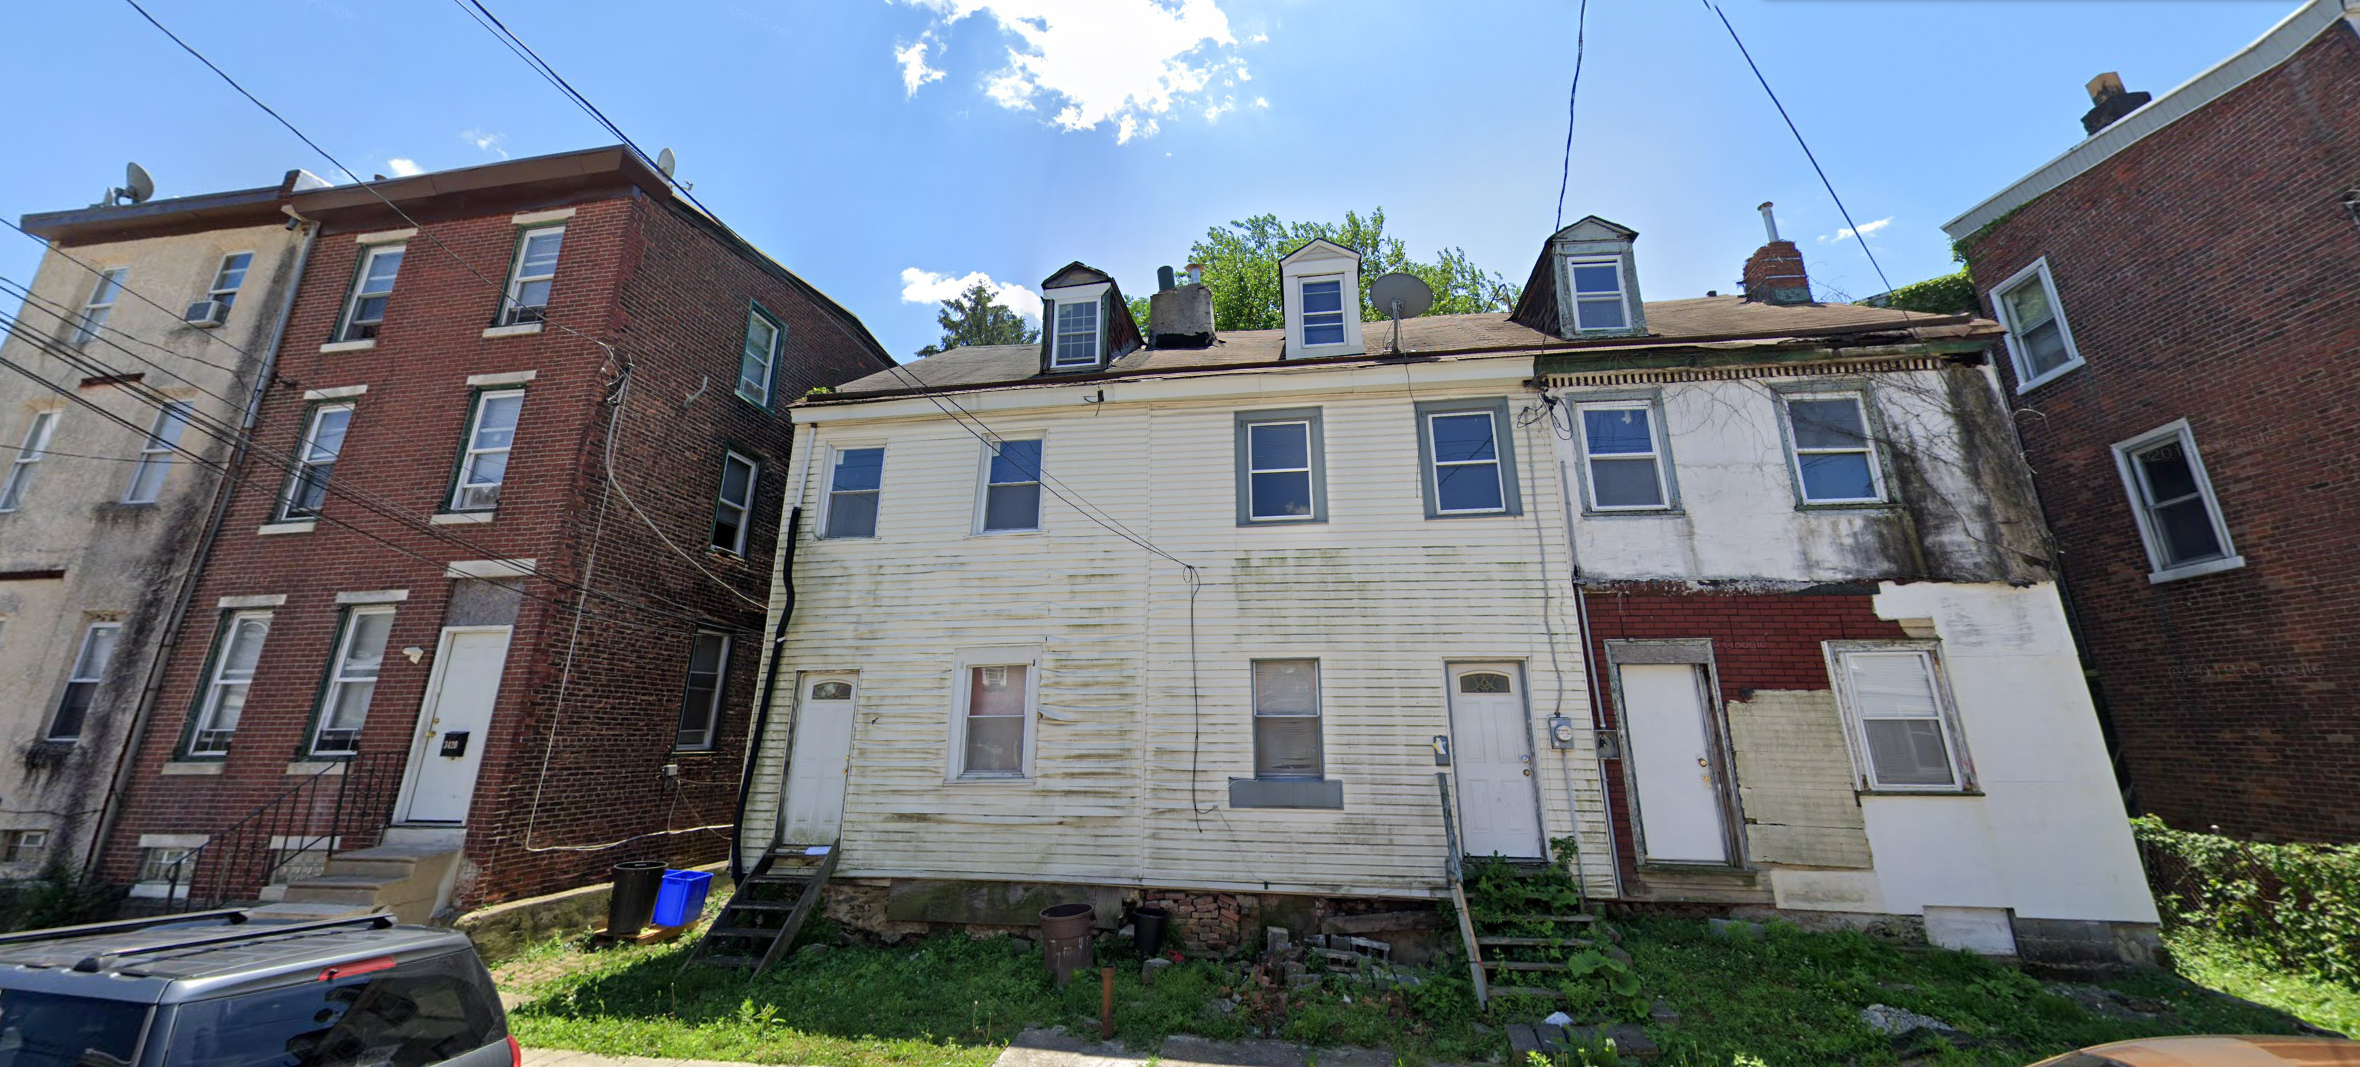 3422 West Clearfield Street. Credit: Google.